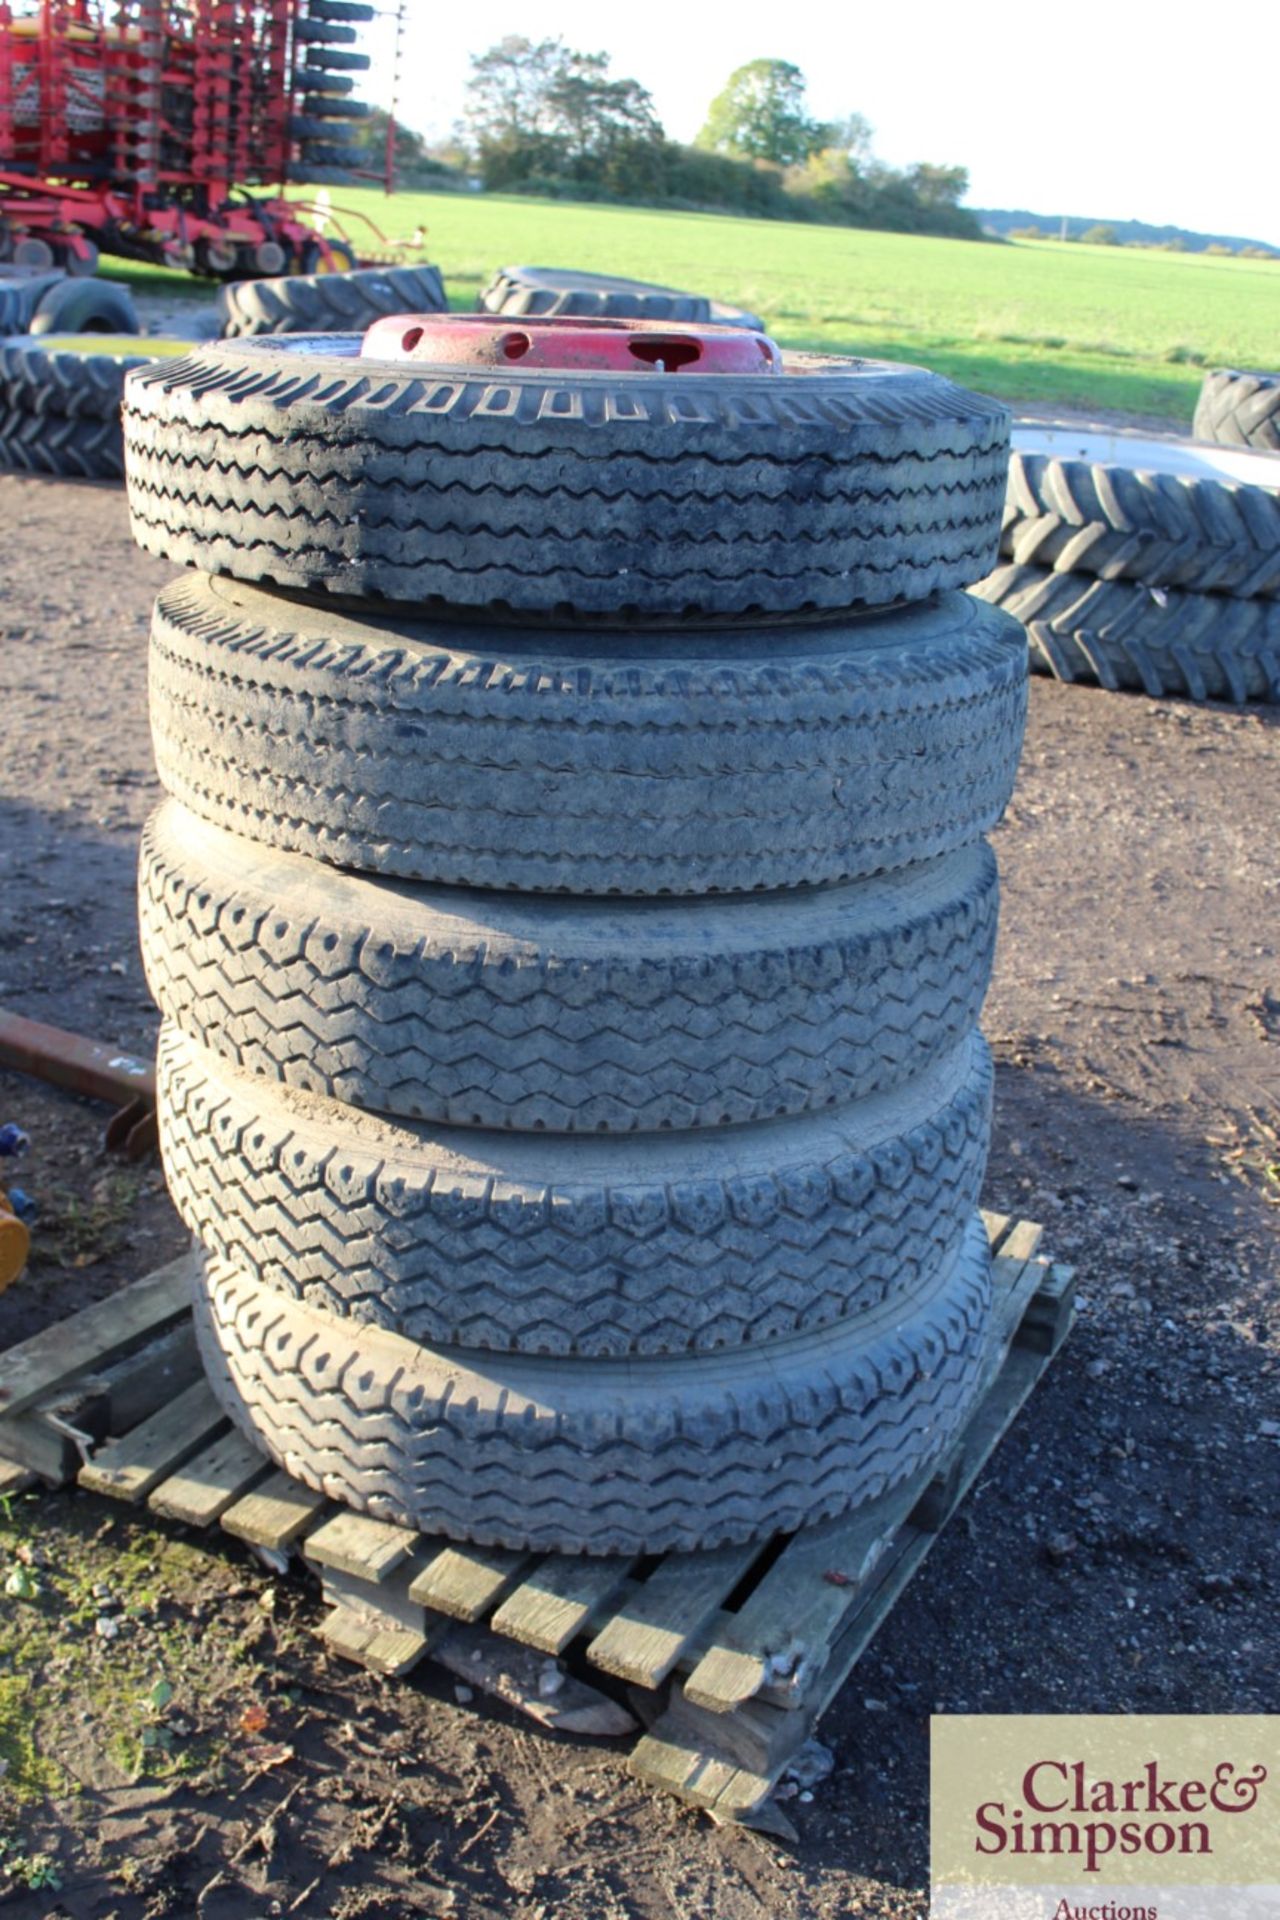 5x 900-20 lorry wheels and tyres. 10 stud centres. - Image 2 of 2